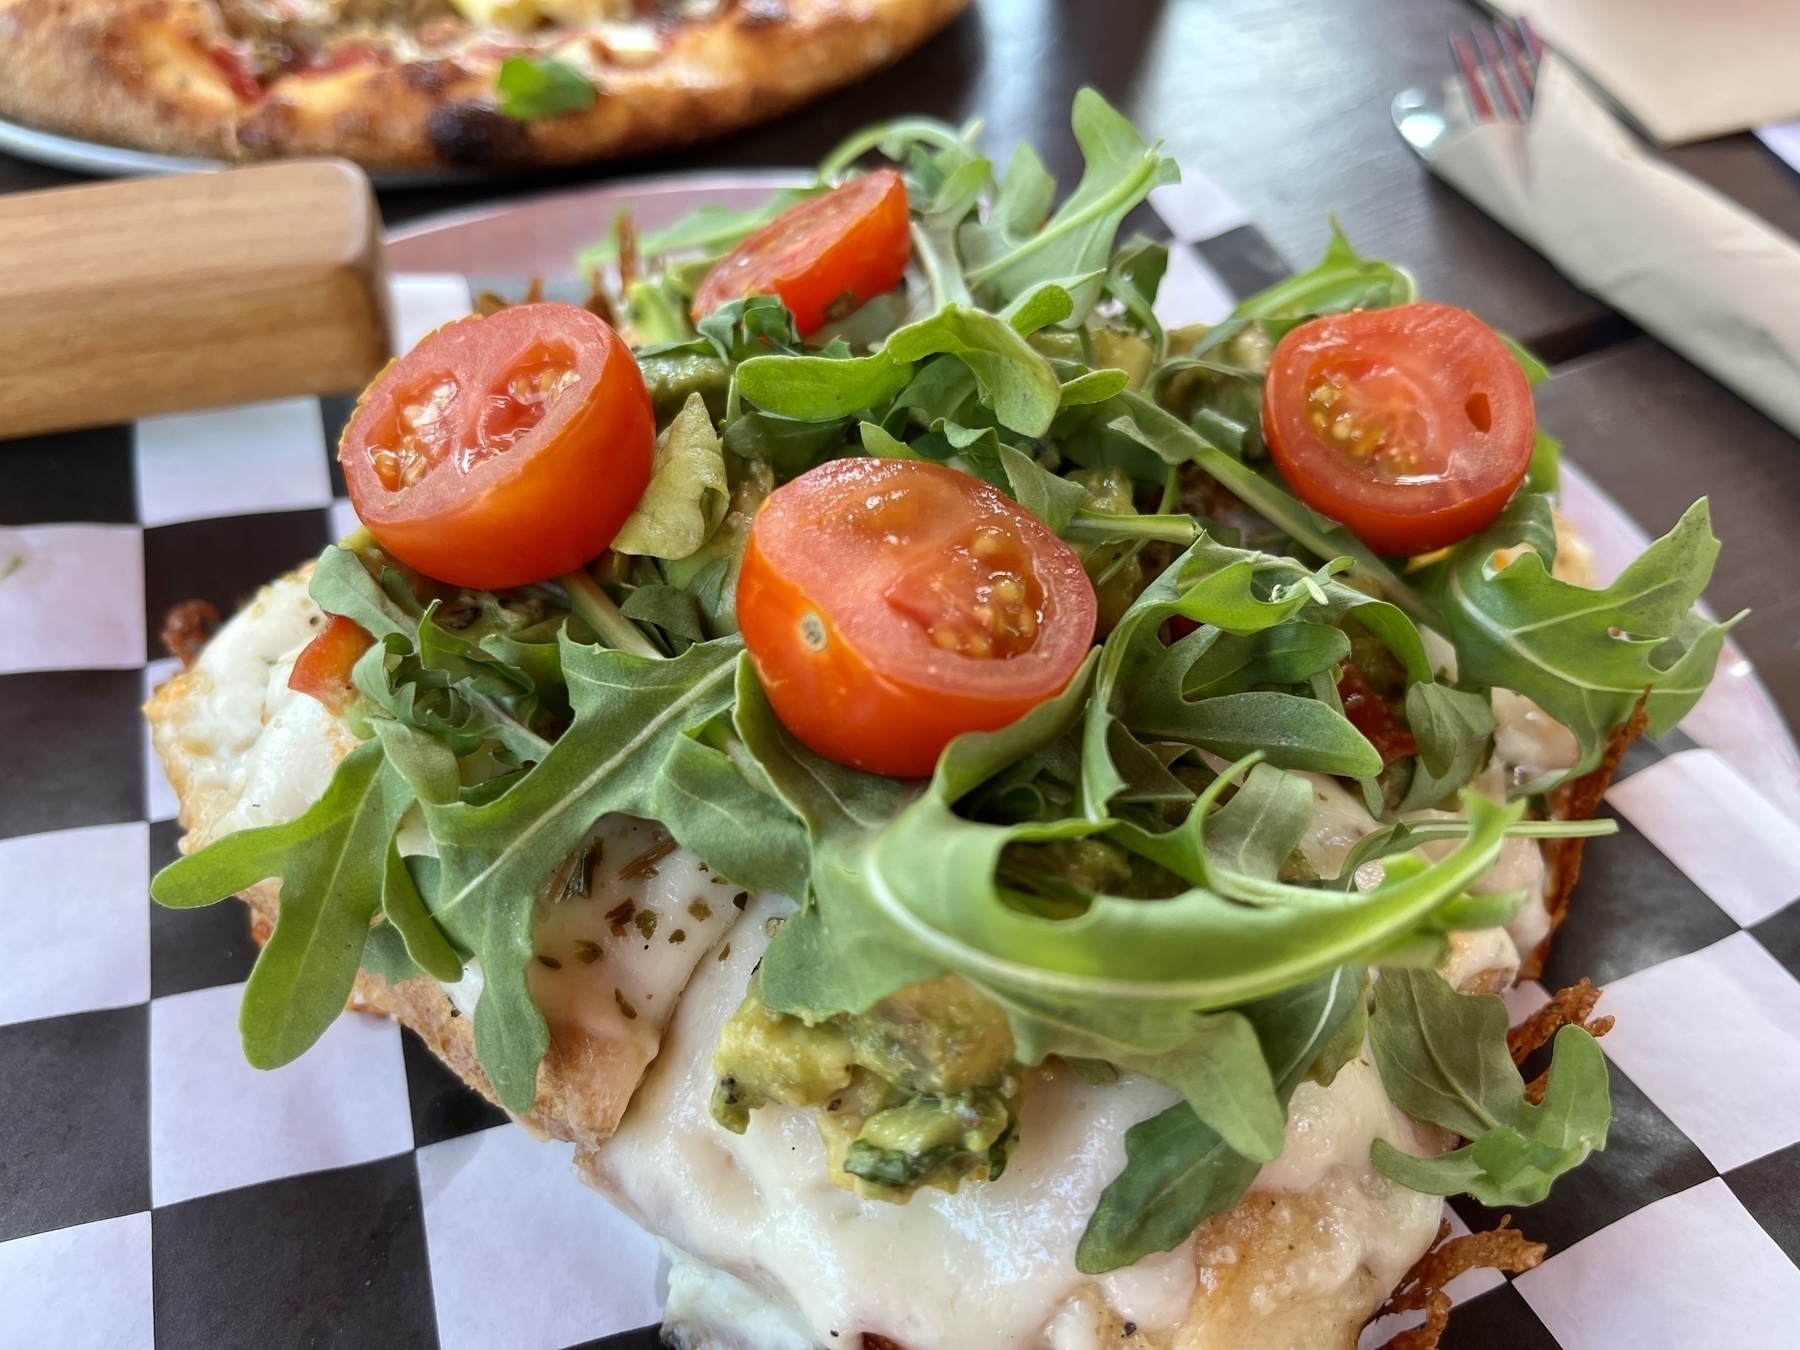 Avocado toast — smashed avos covered in arugula and cherry tomatoes on top of cheese & Detroit pizza crust 